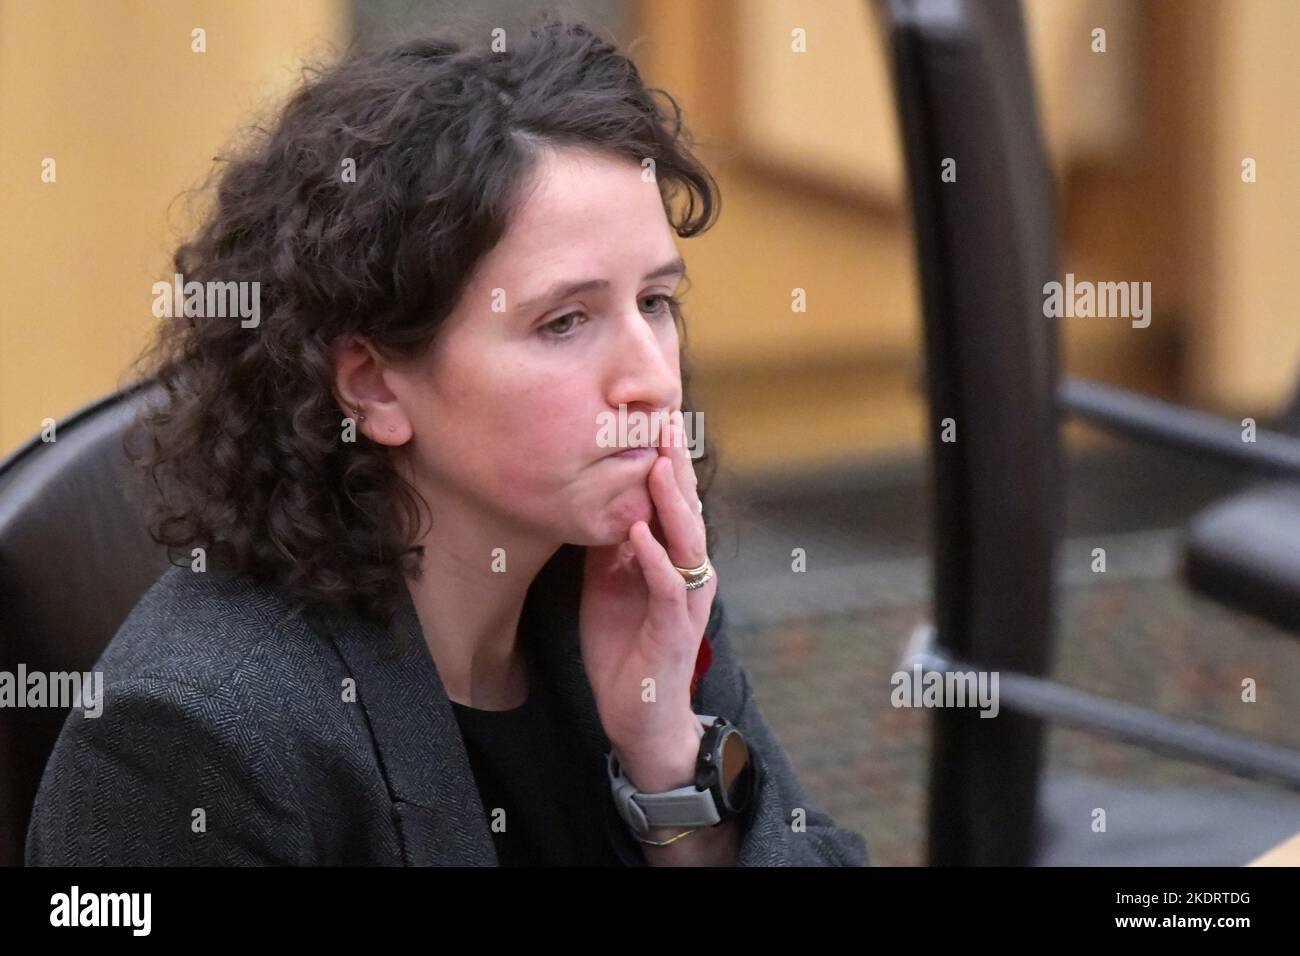 Edinburgh Scotland, UK 08 November 2022. Cabinet Secretary for Rural Affairs and Islands Mairi Gougeon at the Scottish Parliament to make a statement on the future agriculture support and food security in Scotland. credit sst/alamy live news Stock Photo